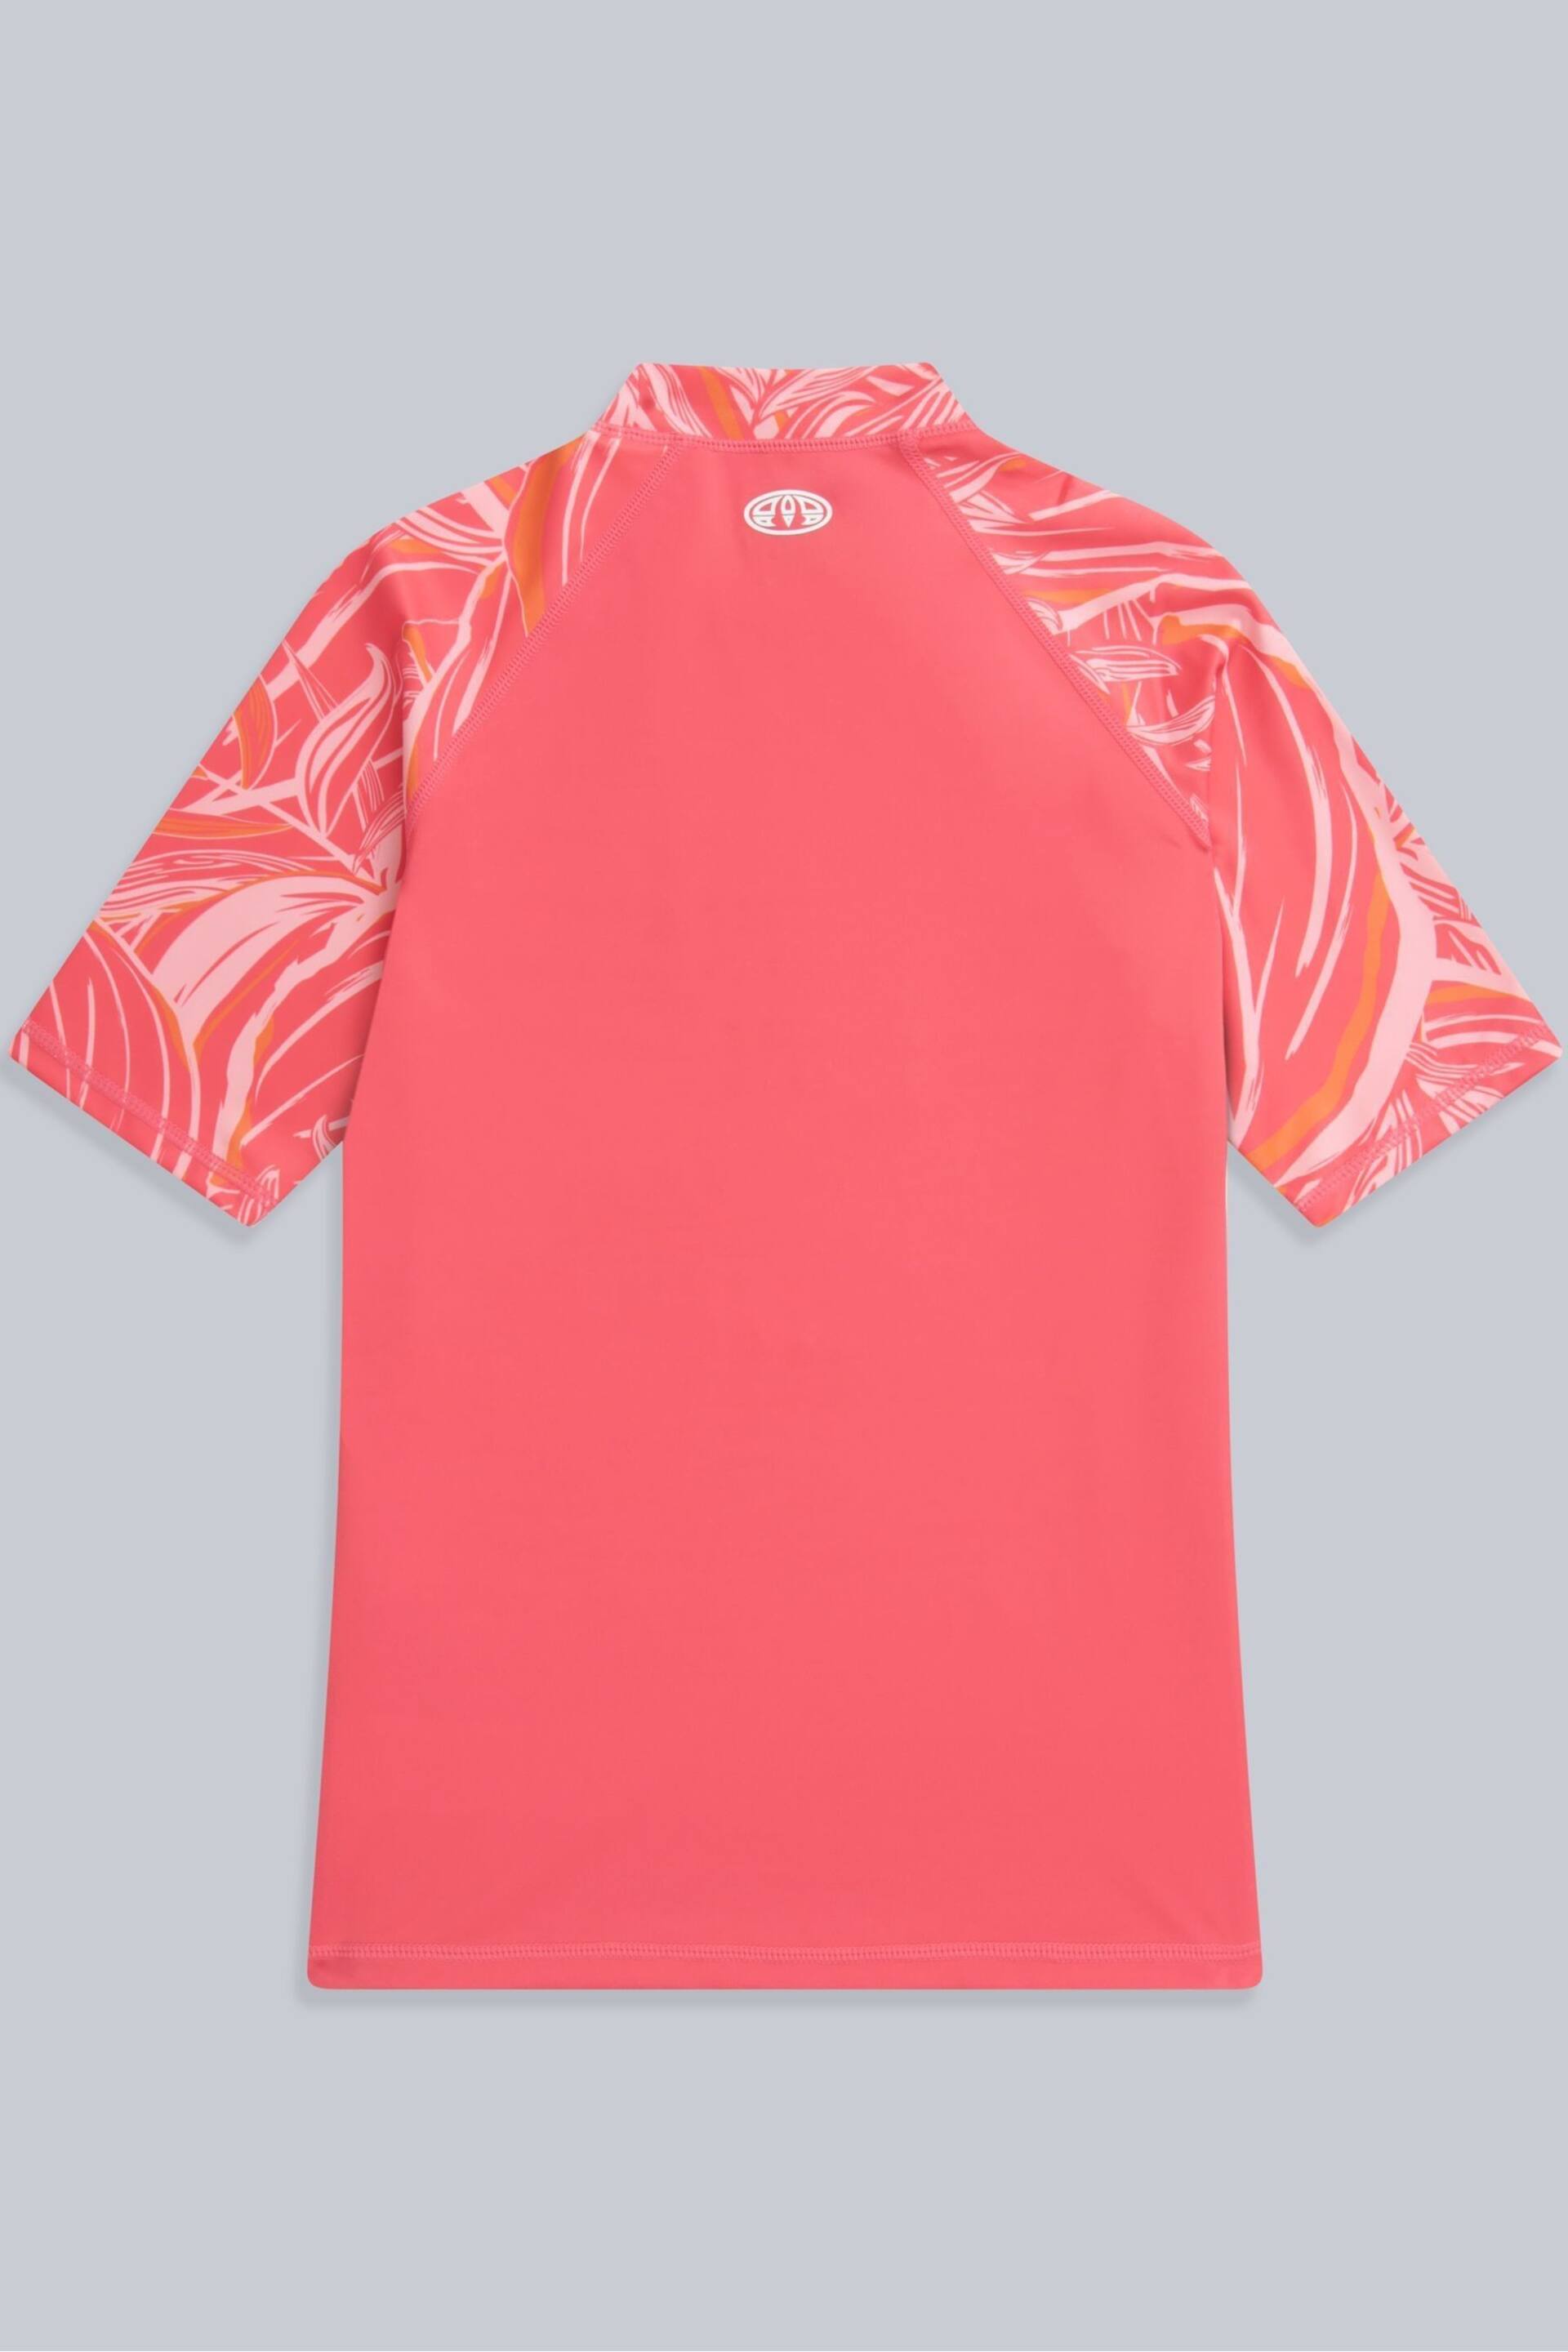 Animal Womens Lucie Recycled Rash Vest - Image 6 of 8